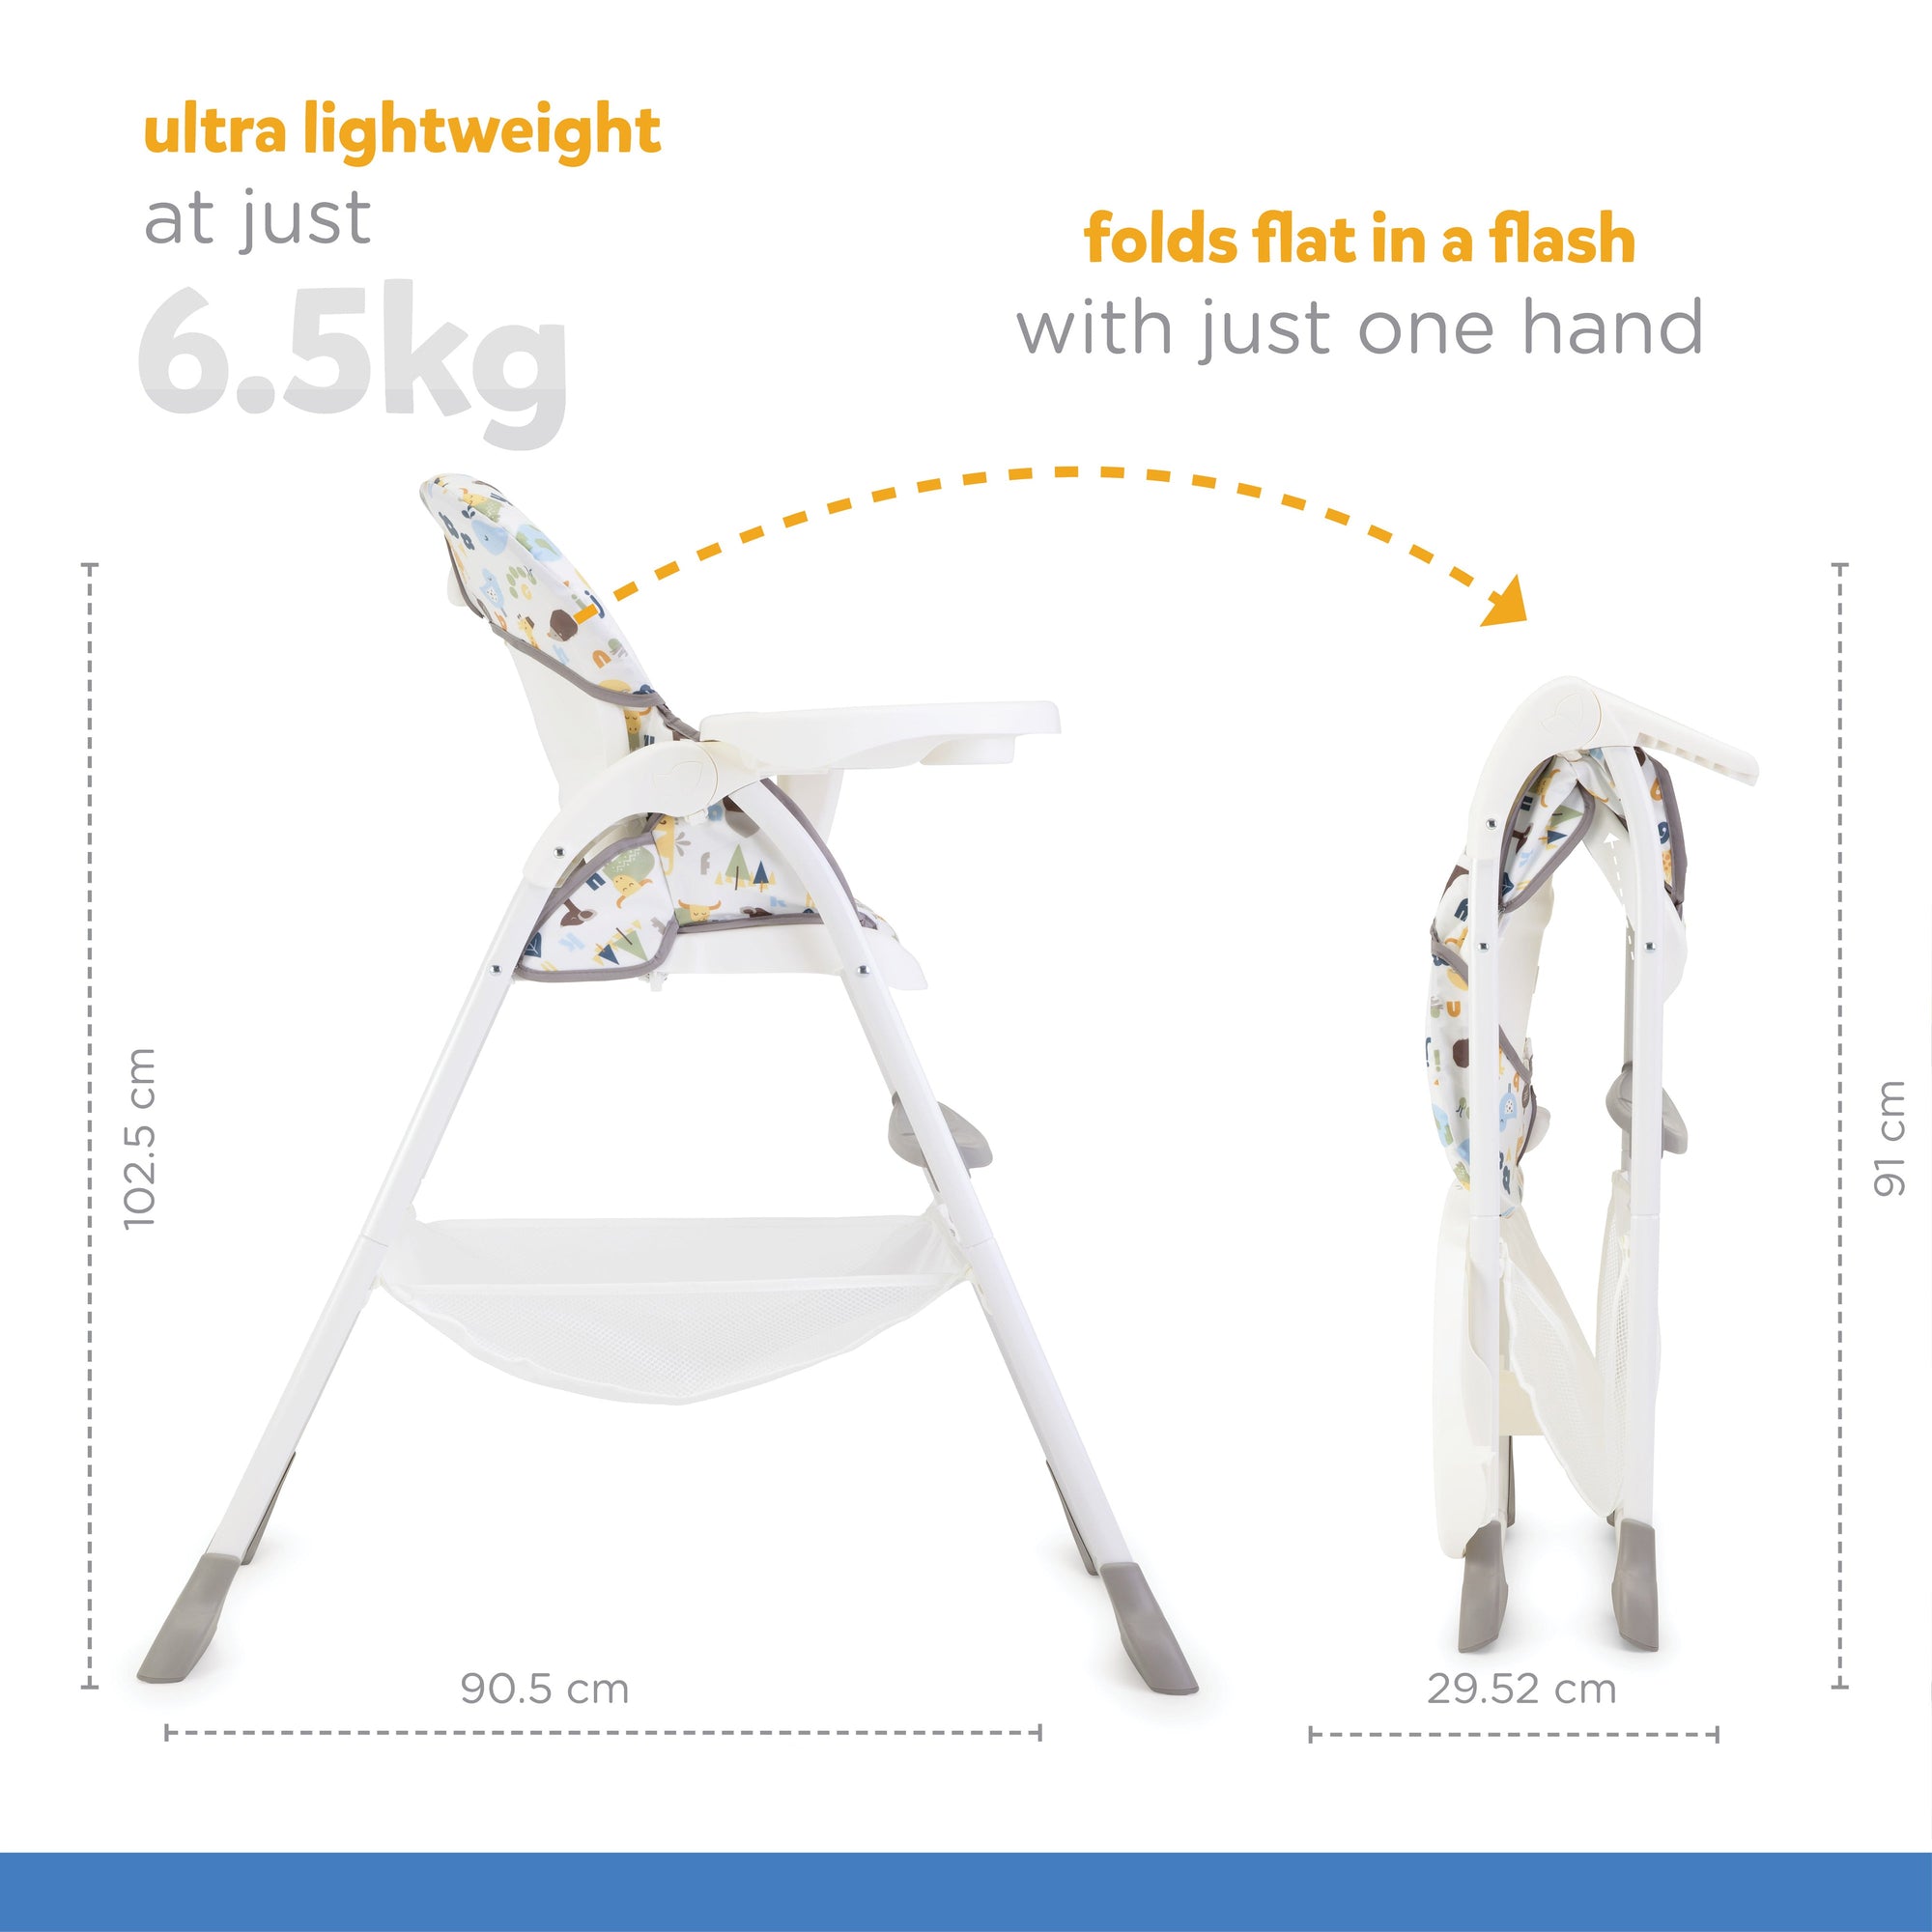 Joie Mimzy Snacker High Chair || Fashion-Alphabet || 6months to 36months - Toys4All.in